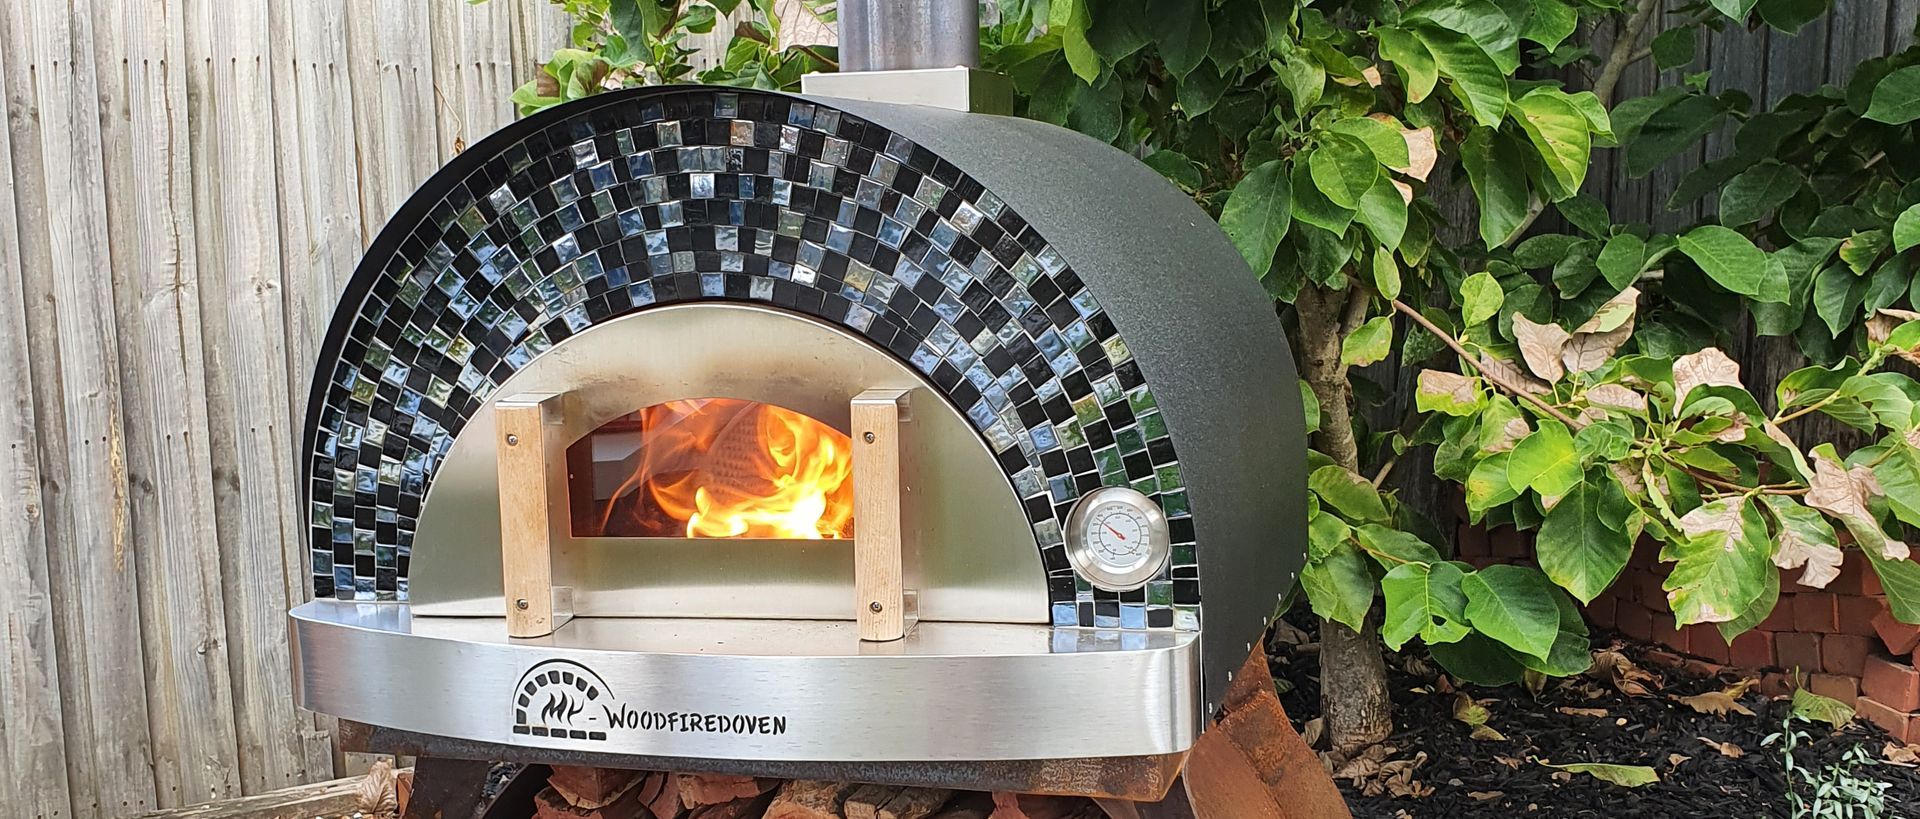 My Wood Fired Oven Banner image